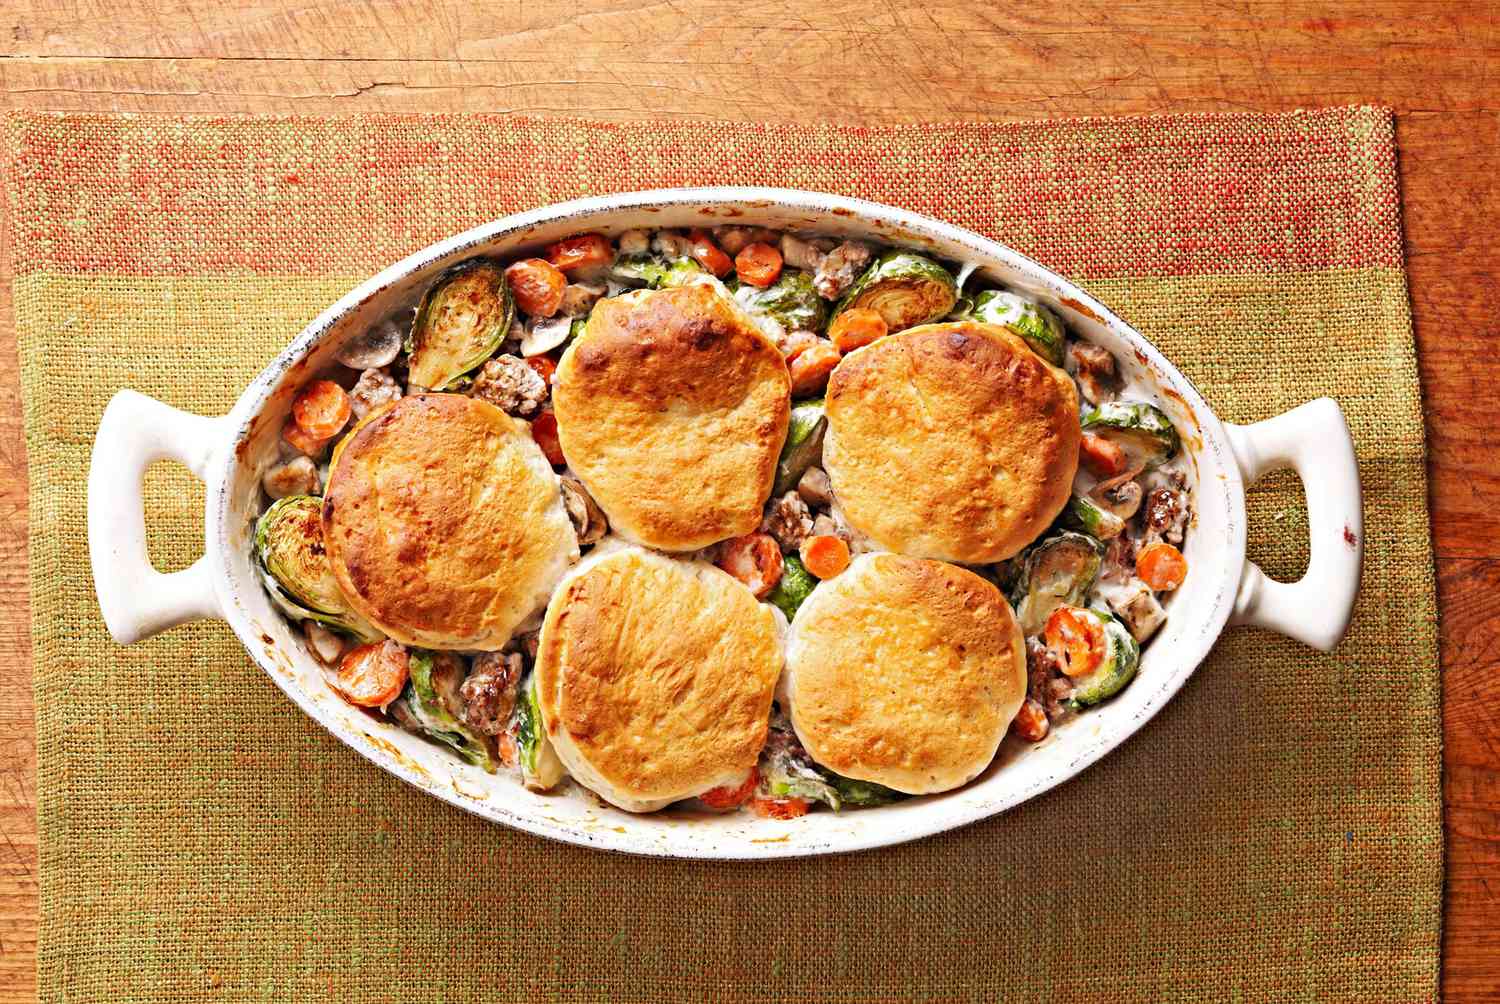 Beef and Vegetable Biscuit Bake 